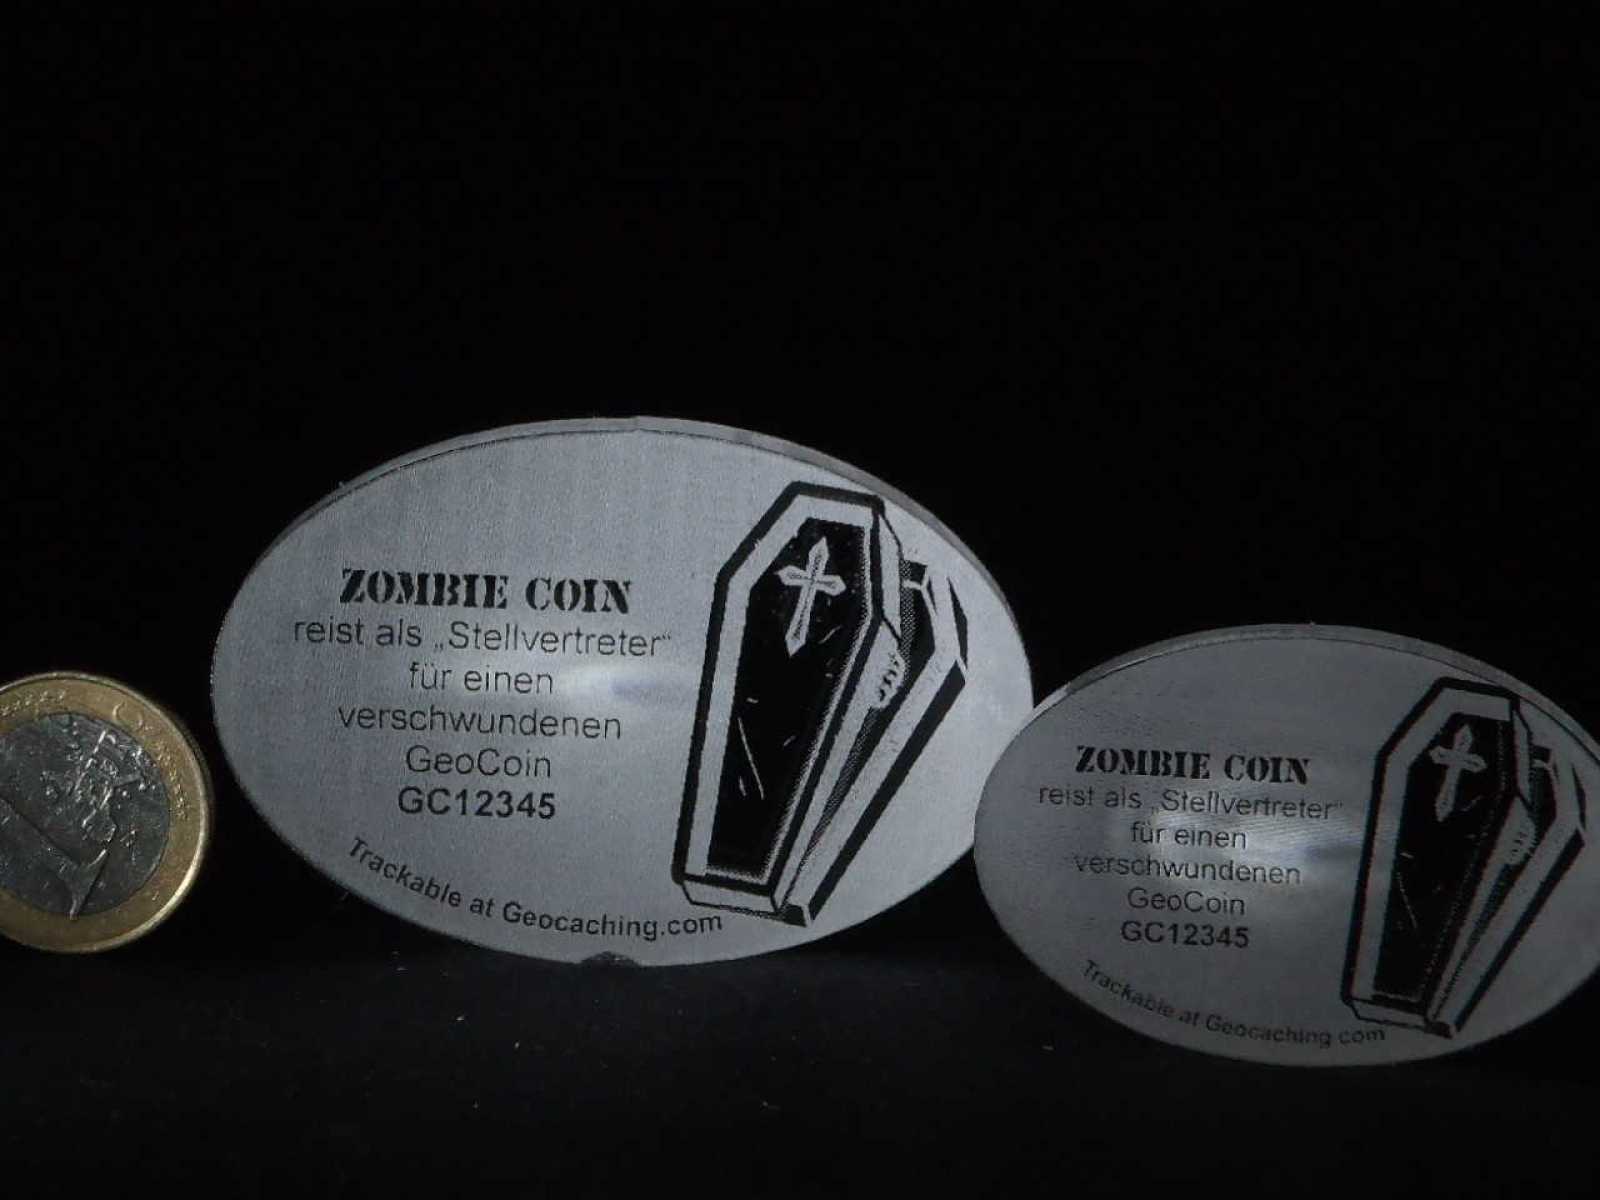 Lost Geocoin "The Zombie Coin #2"